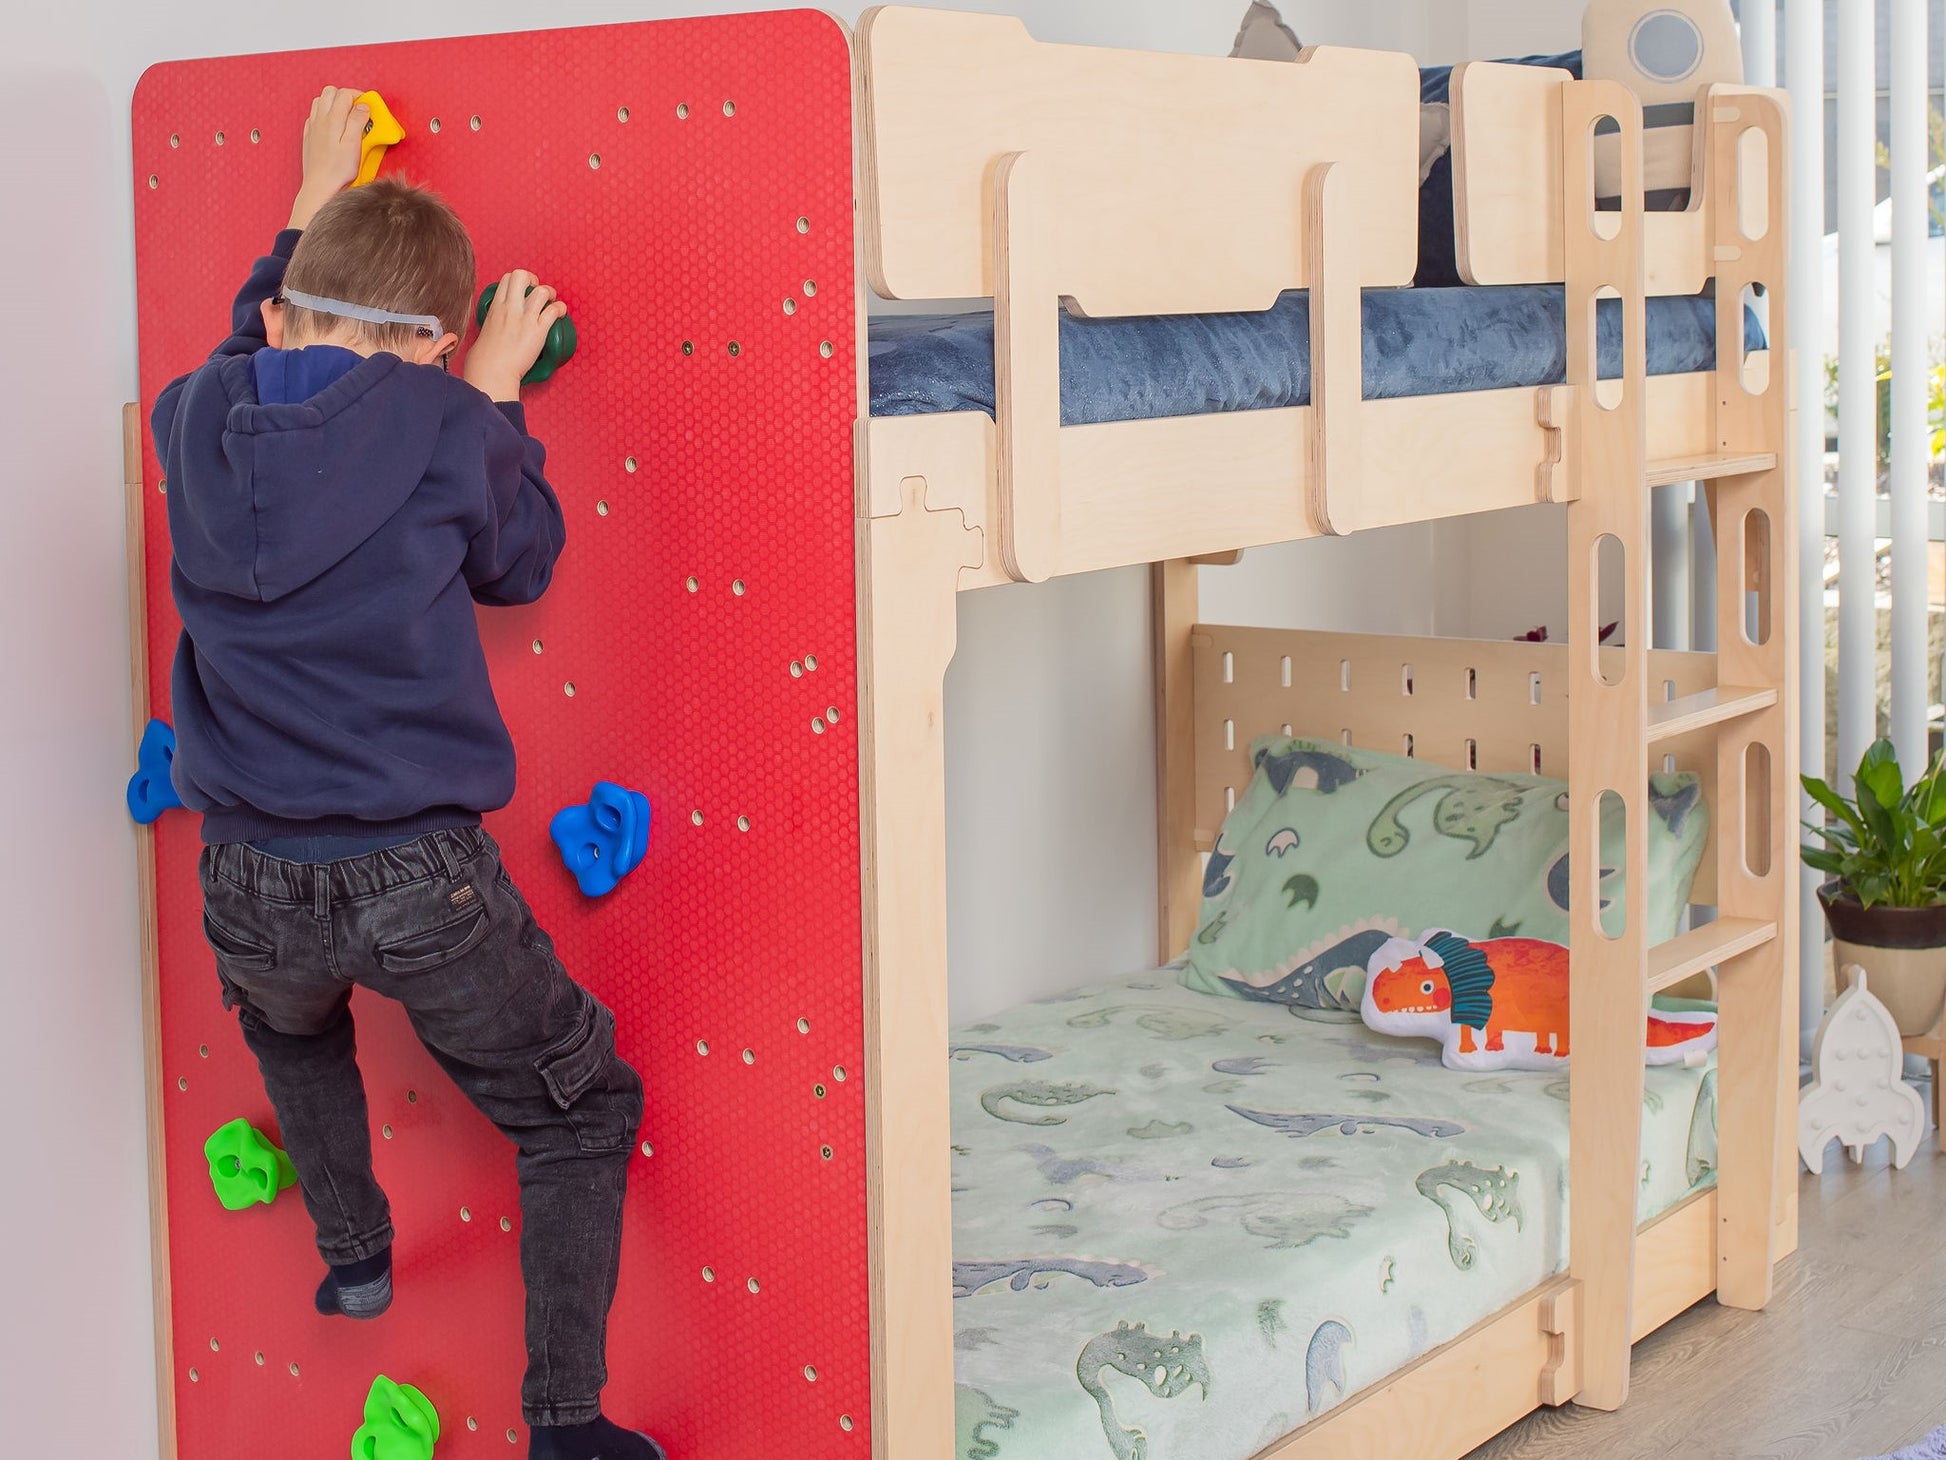 Introducing the Flippable Transformer Bunk Bed: 3-in-1 versatility from low bed to standard to bunk. Space-saving furniture.